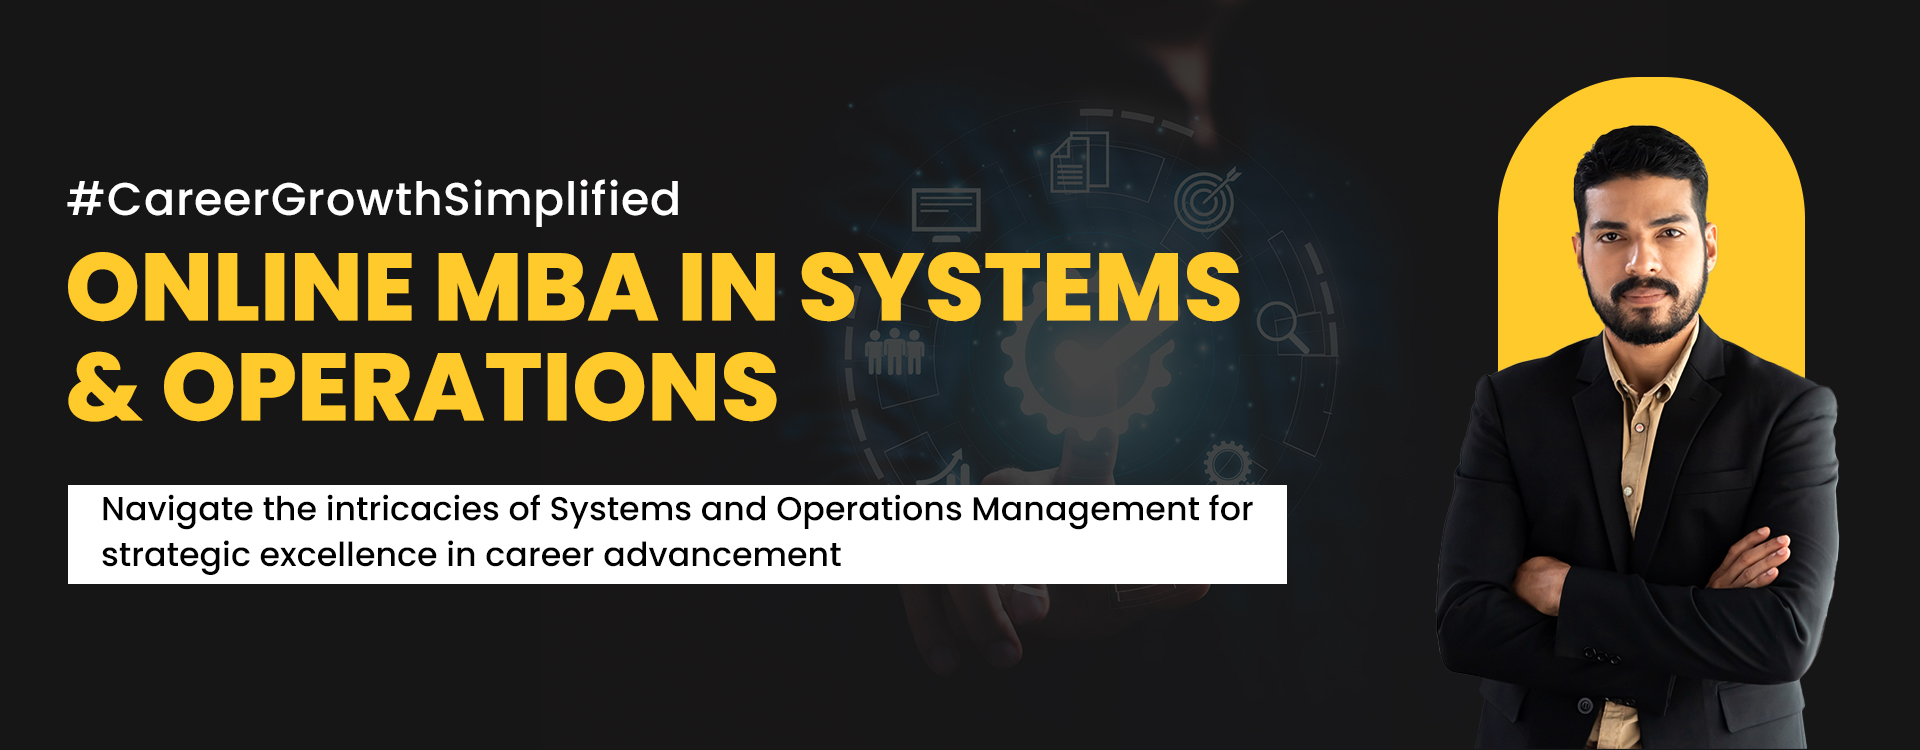 MBA in Systems & Operations - Pillar Page Banner